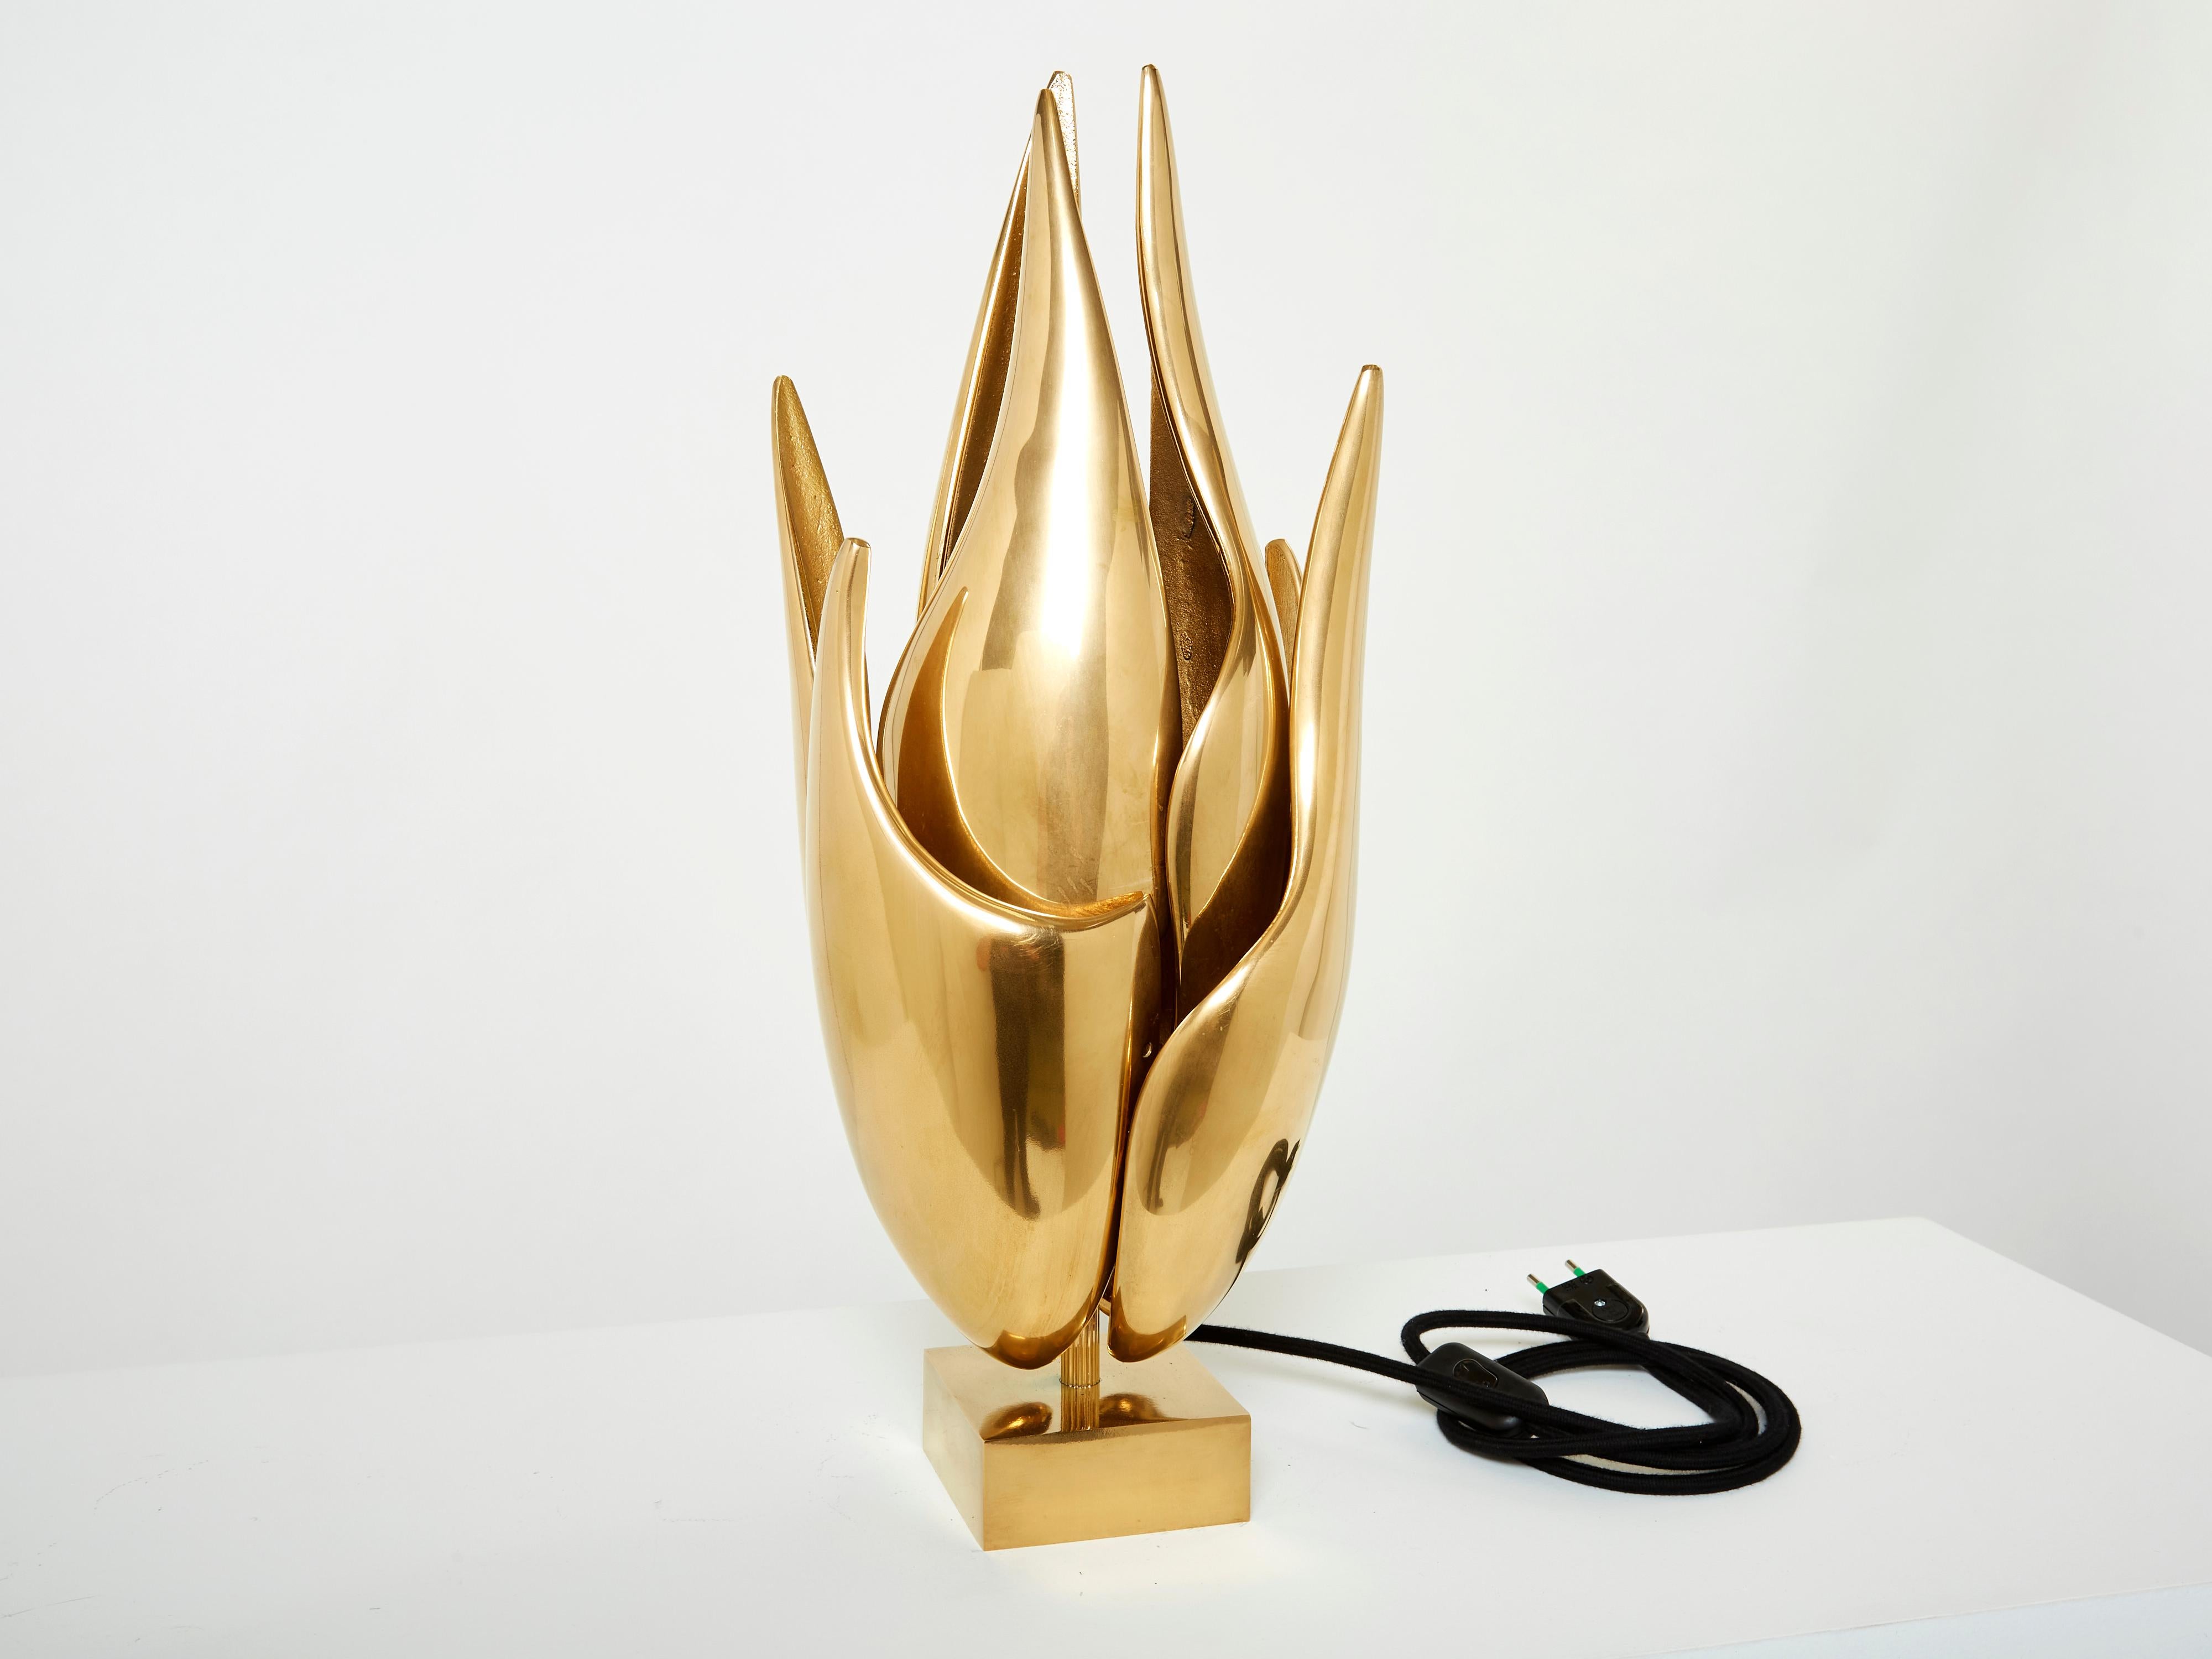 This beautiful table lamp produced by Atelier Michel Armand in the 1970s has the visual impact of a modernist sculpture. This rare model, named Flamme, is made of solid bronze fully gilded, and shaped as a moving flame. The result is the impression